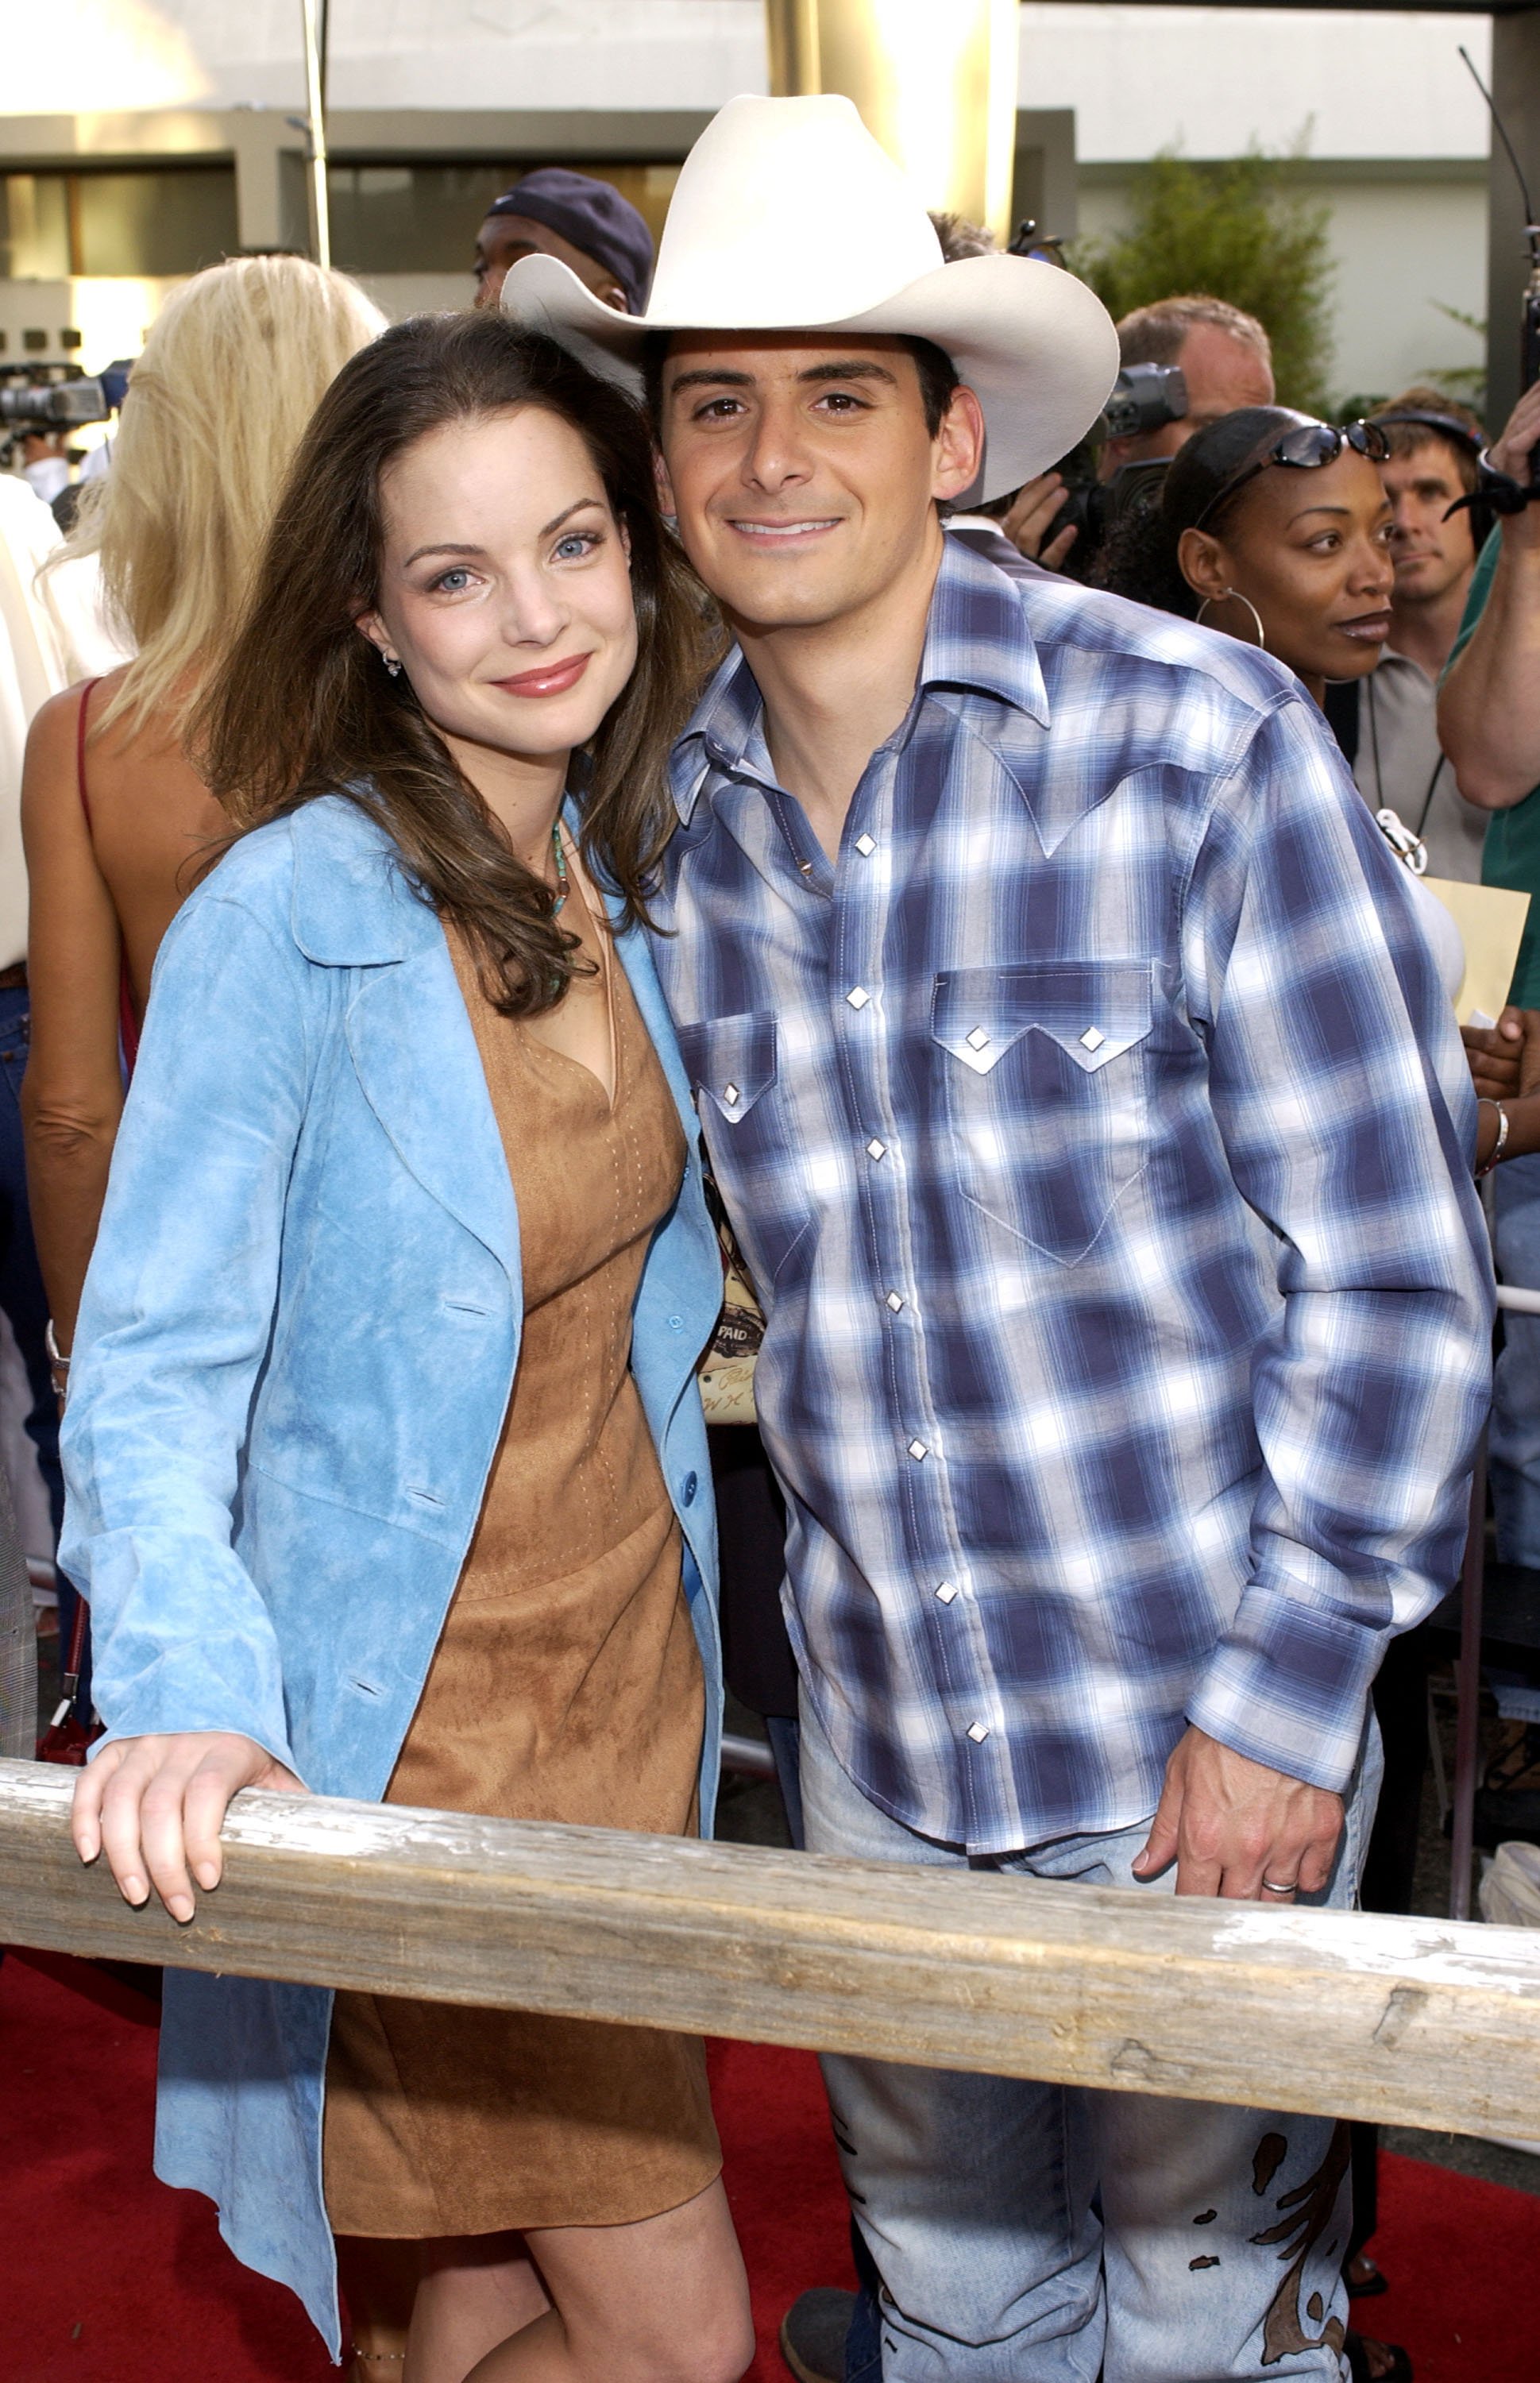 Kimberly Williams and Brad Paisley during the premiere of "Open Range" at Arclight Cinerama Dome in Los Angeles, California | Source: Getty Images